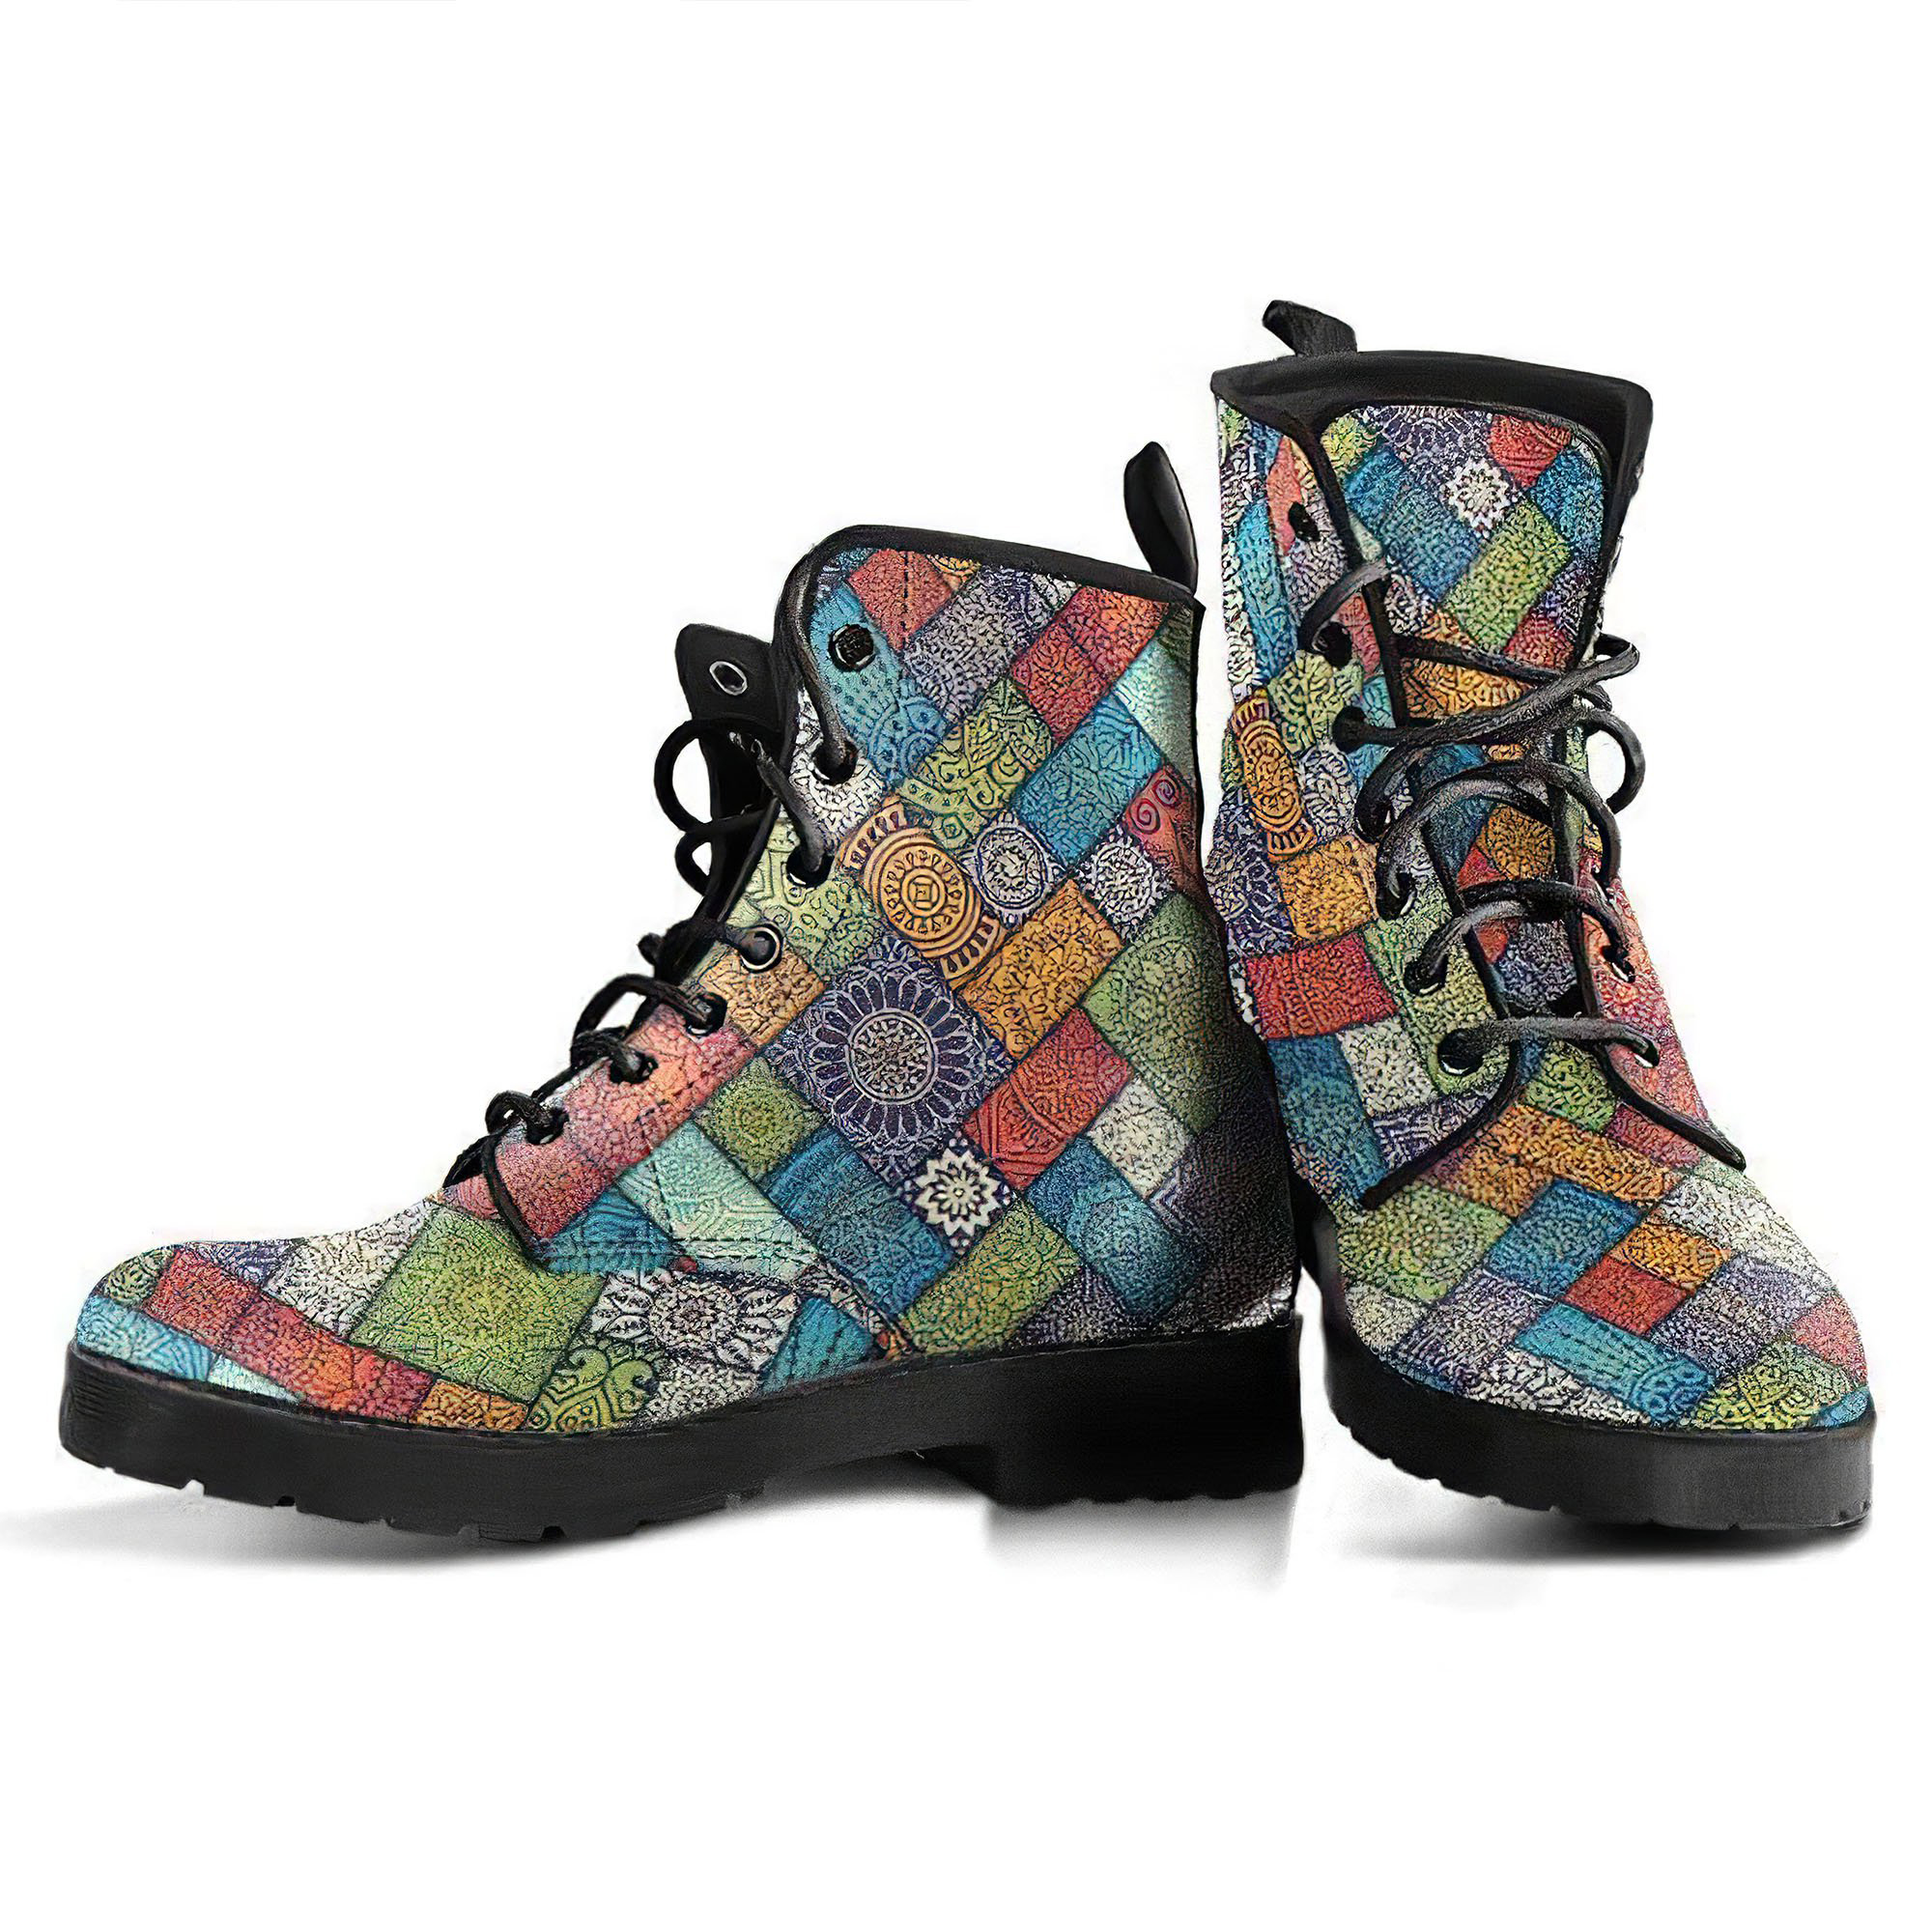 diagonal-floral-tiles-leather-boots-for-women-gp-main.jpg